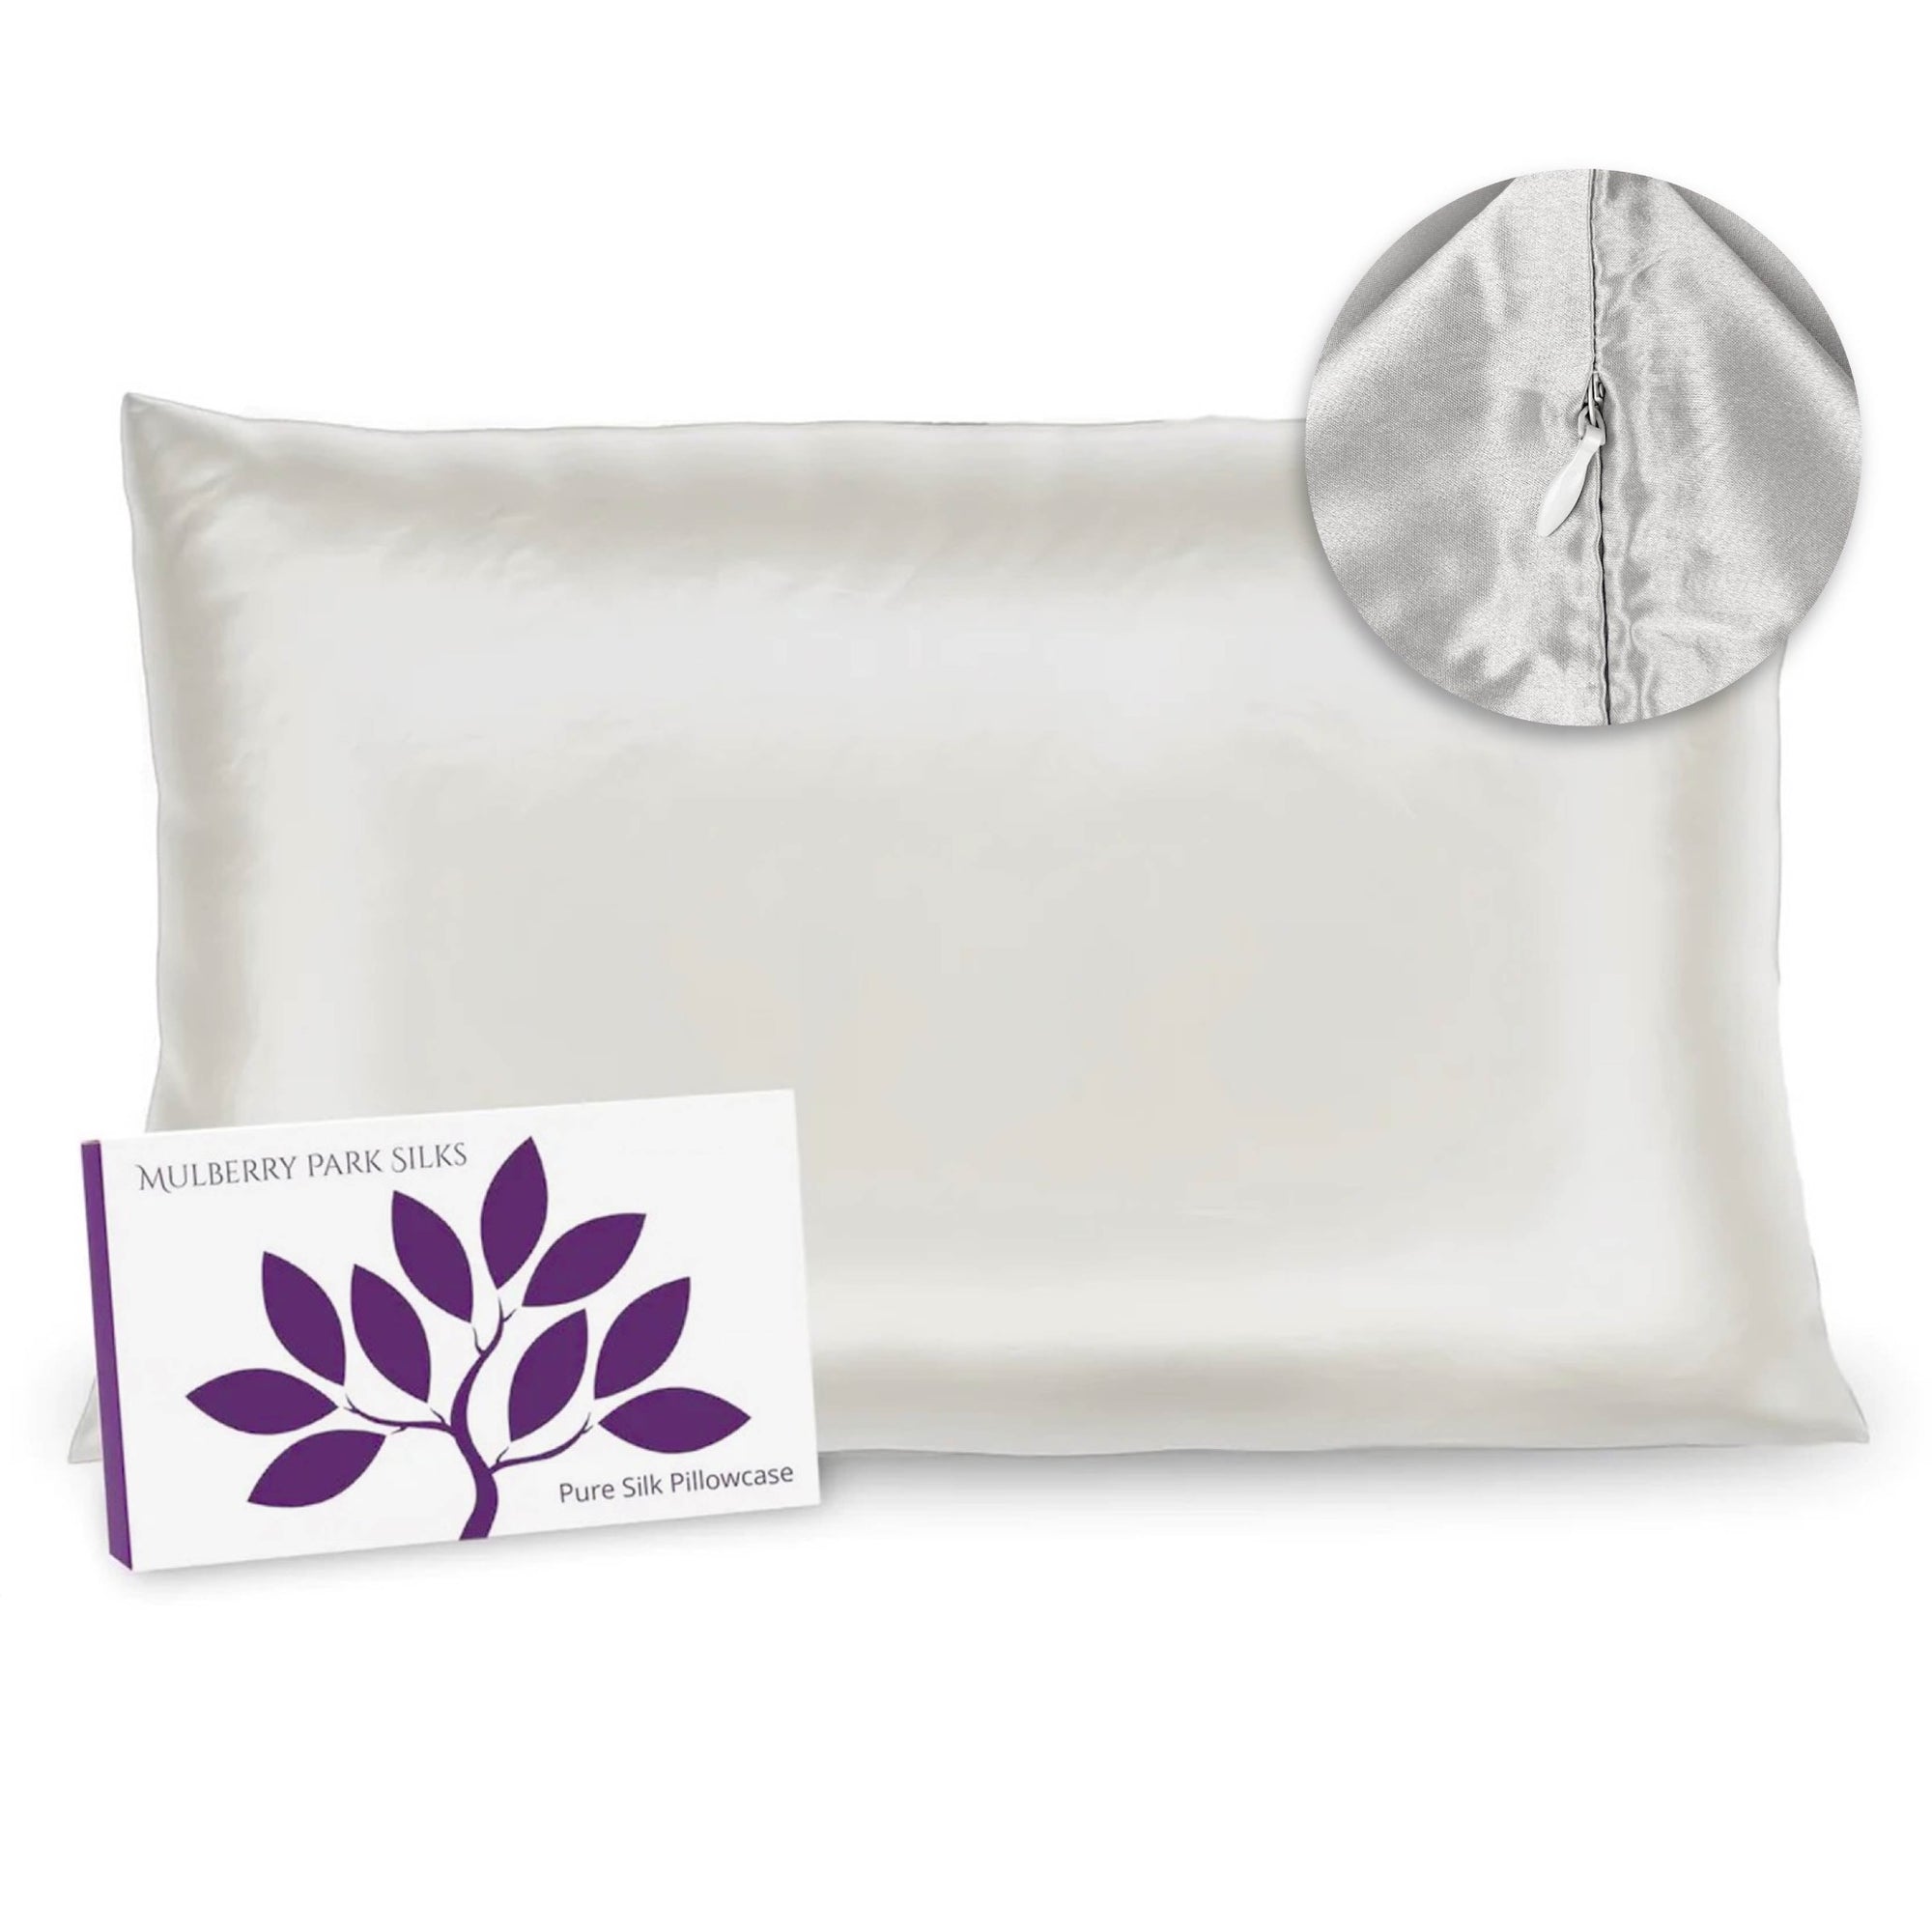 Mulberry Park Silks Deluxe 19 Momme Pure Silk Pillowcase in Ivory Color with Box